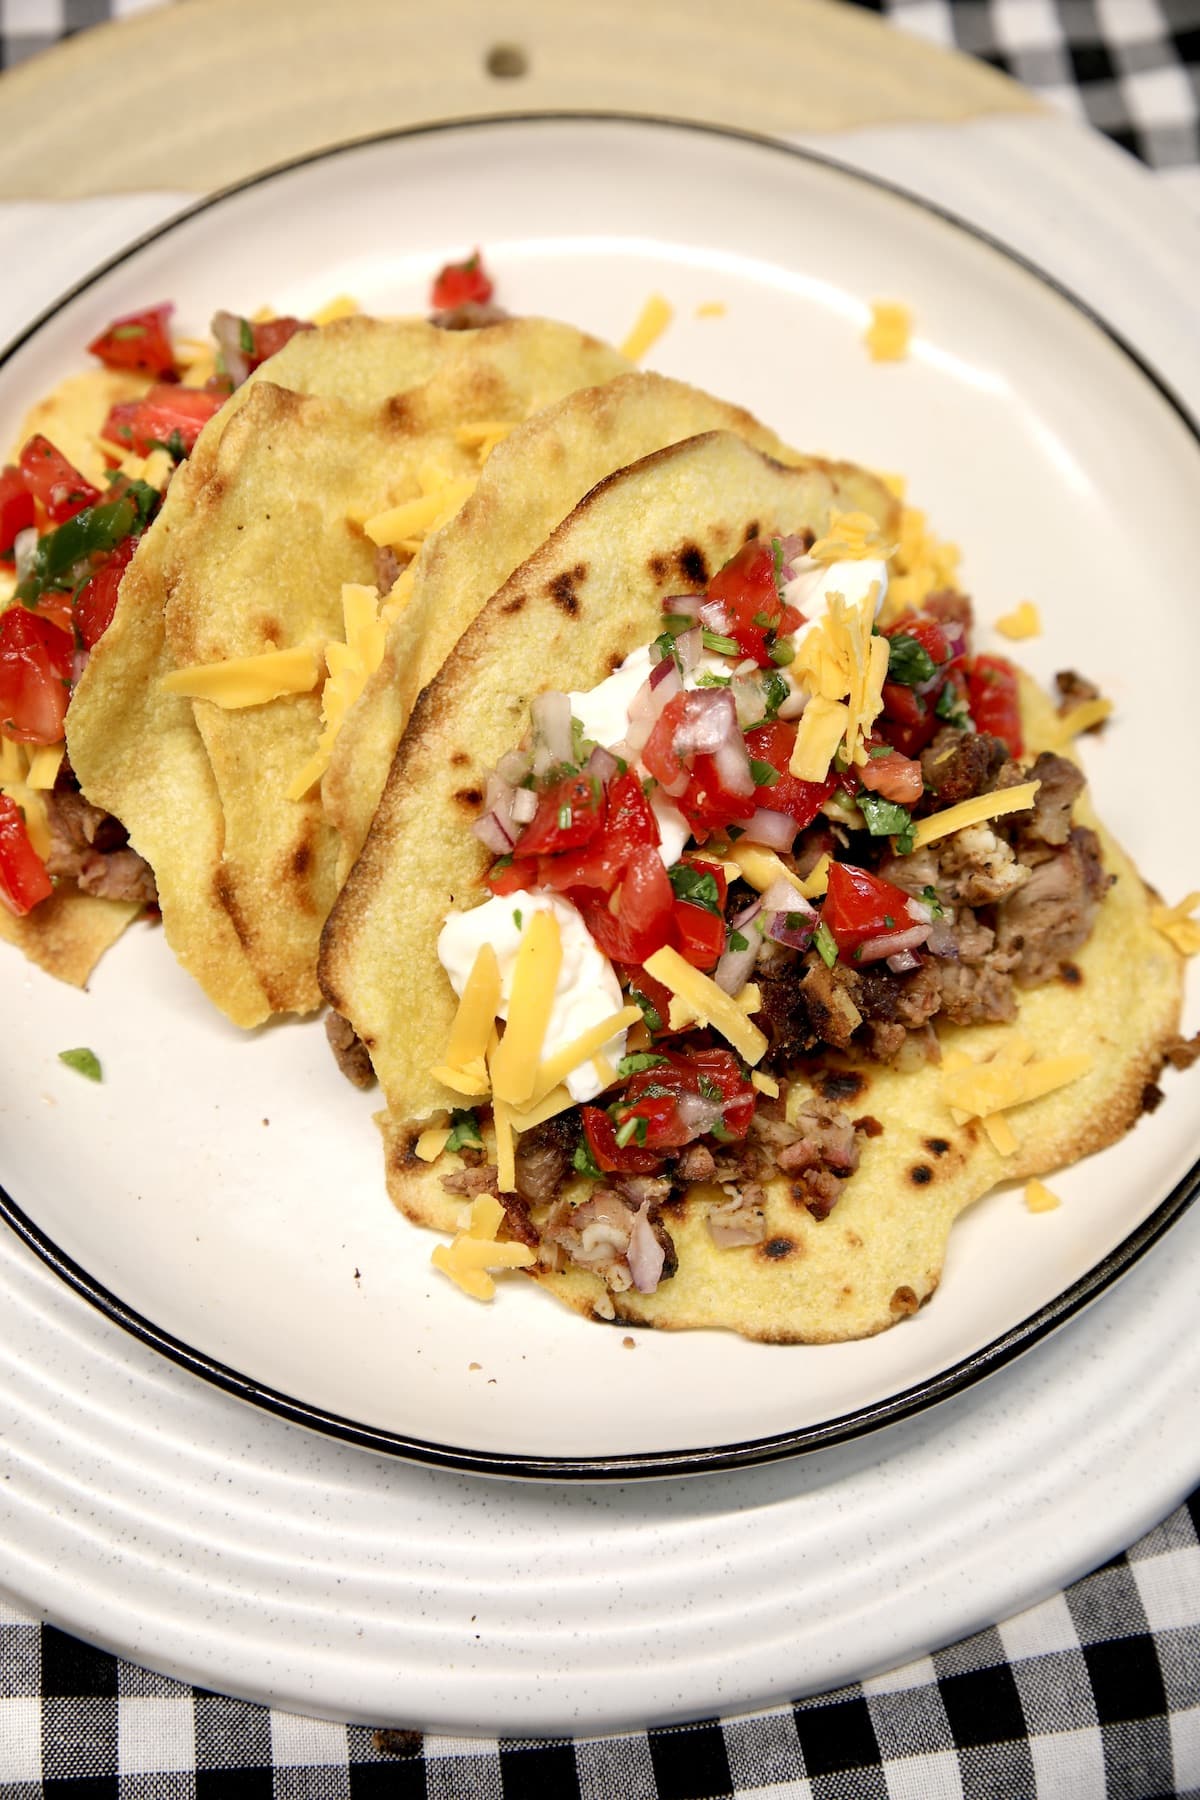 Short rib tacos with cheese and salsa.